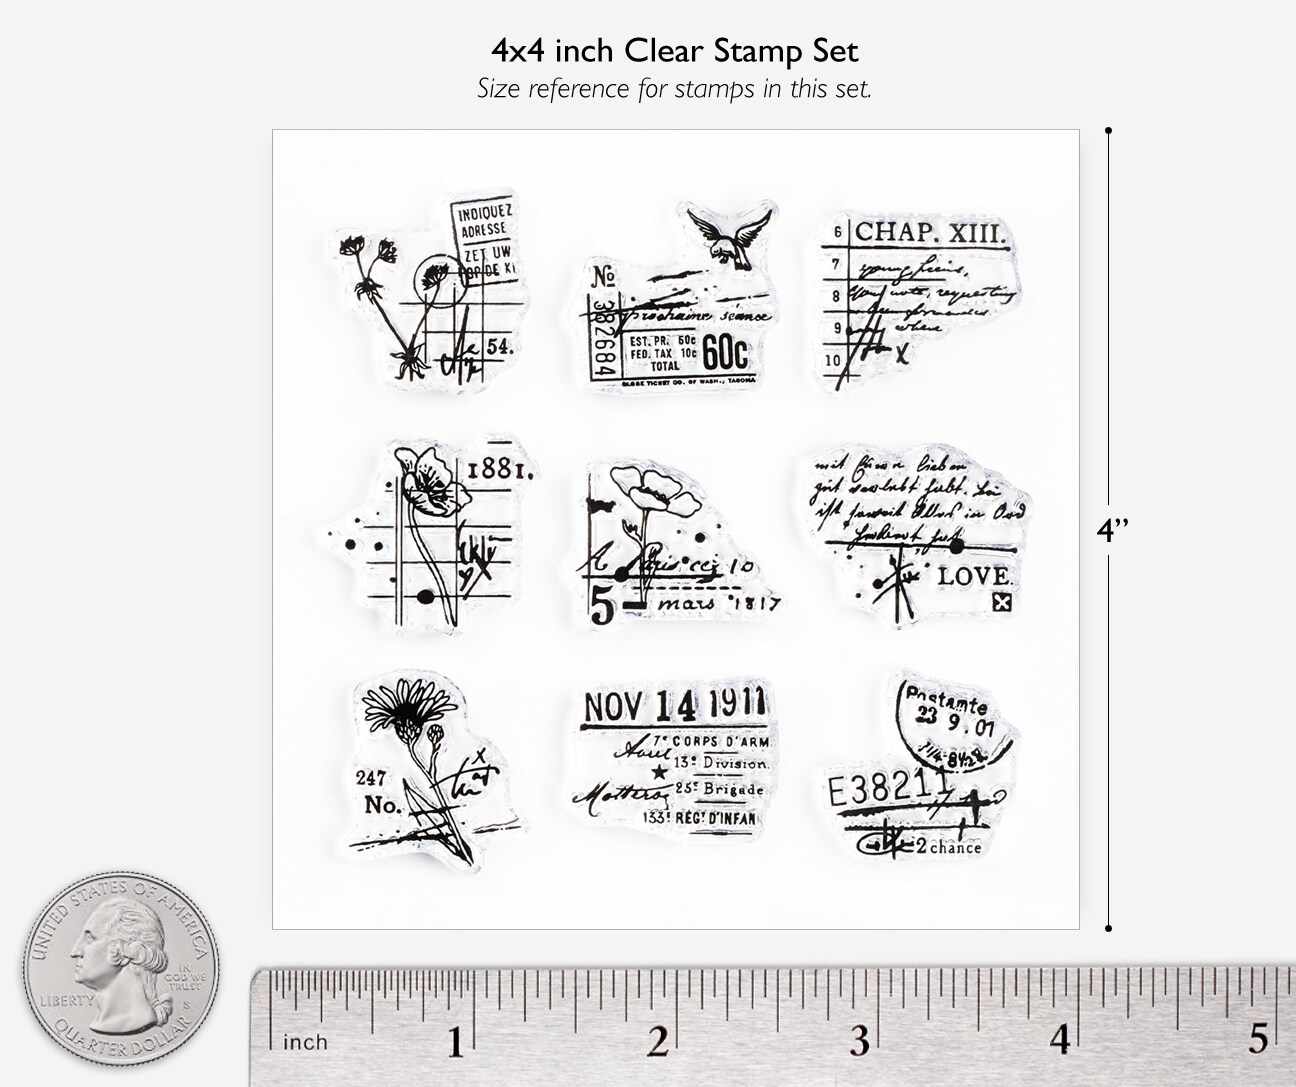 1 inch Small Decorative Stamps on 4x4 inch Sheet by Wintertime Crafts